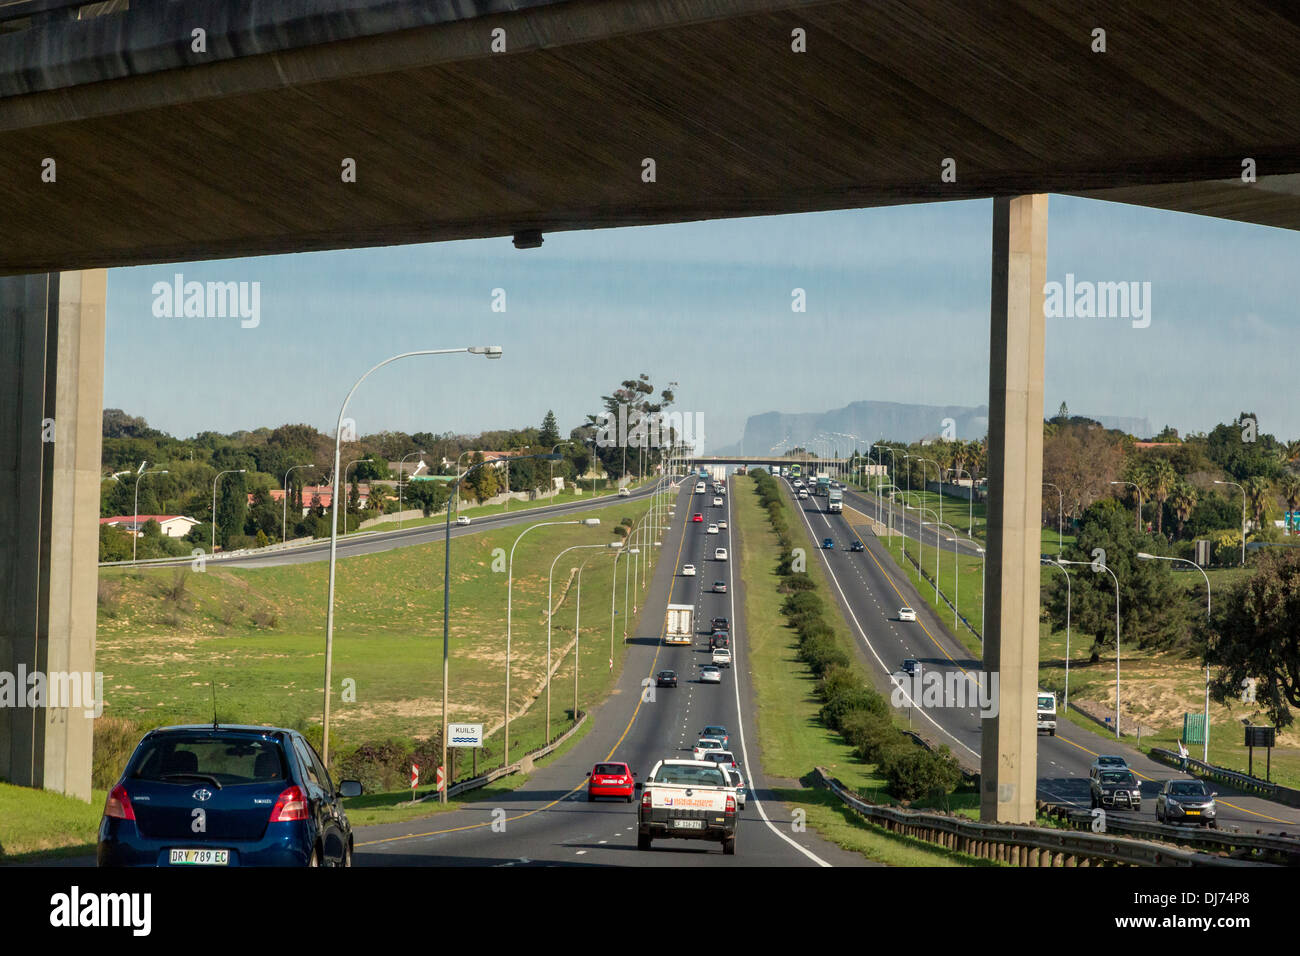 South Africa, Cape Town. Divided Highway headed toward Cape Town. Driving on the left. Table Mountain in the distance. Stock Photo